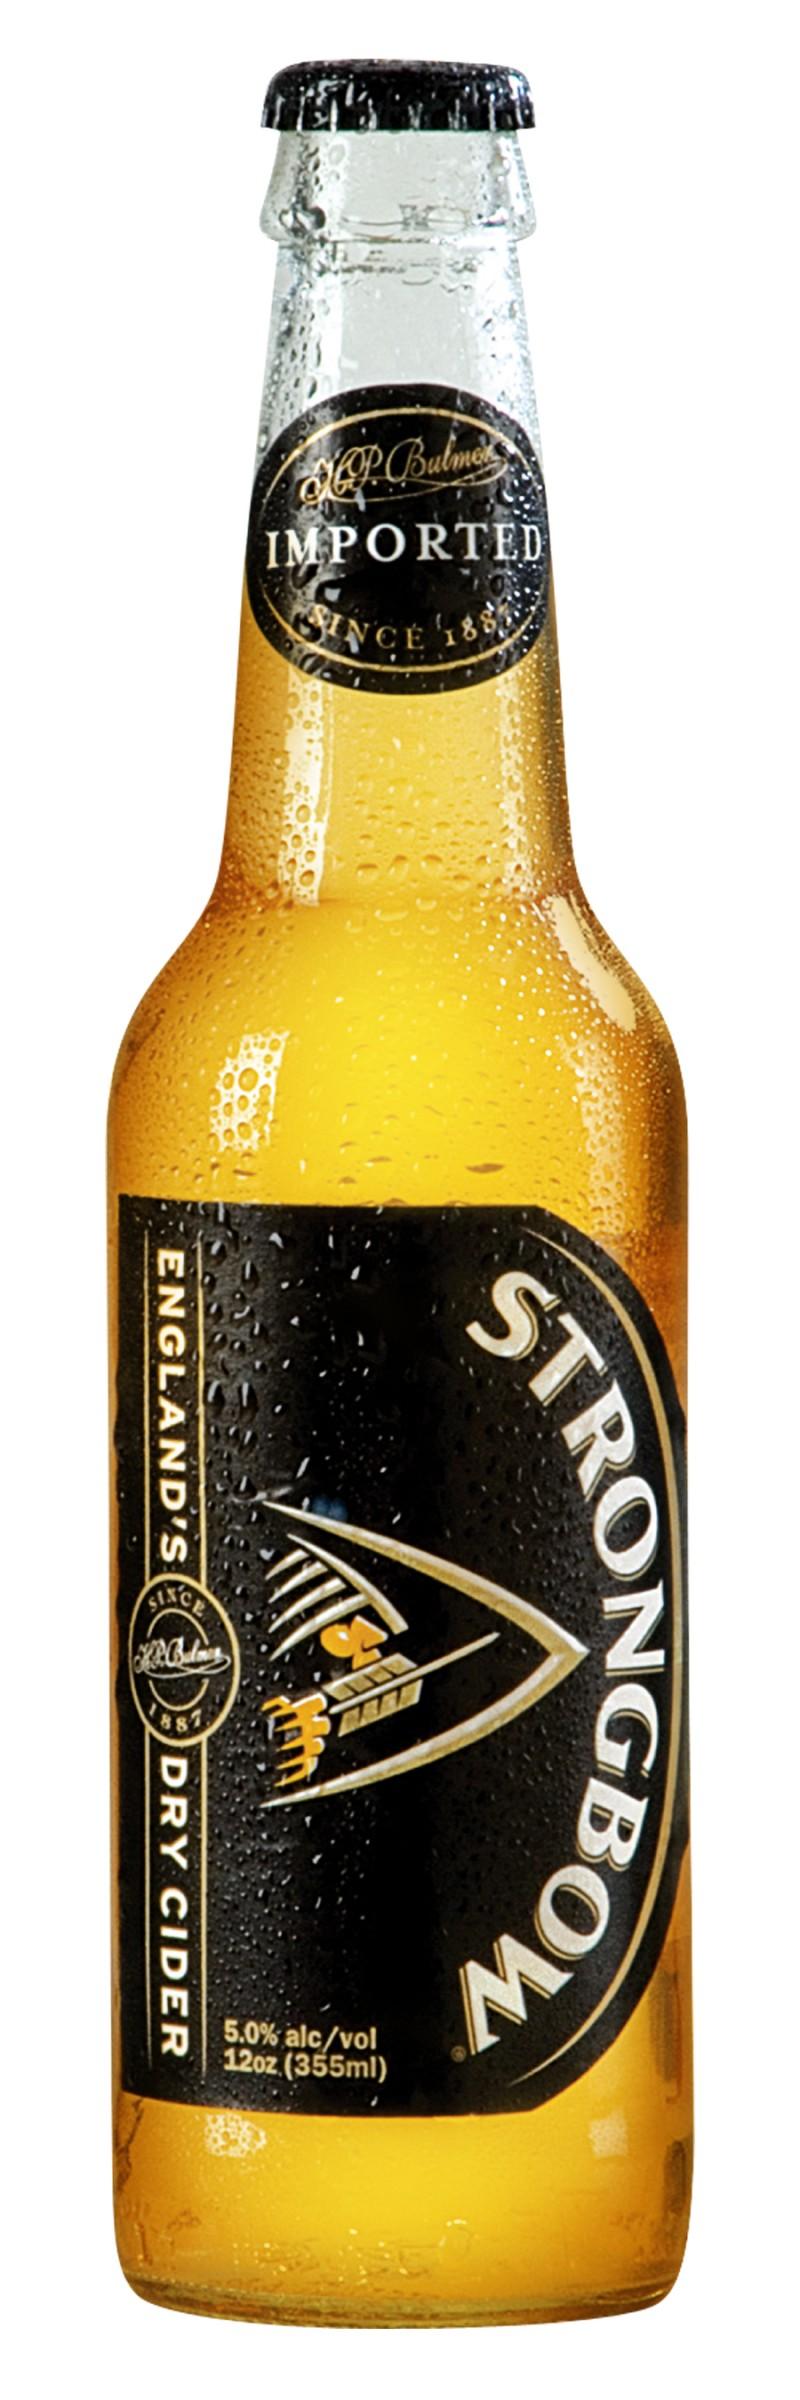 A bottle of Strongbow, a popular English cider.